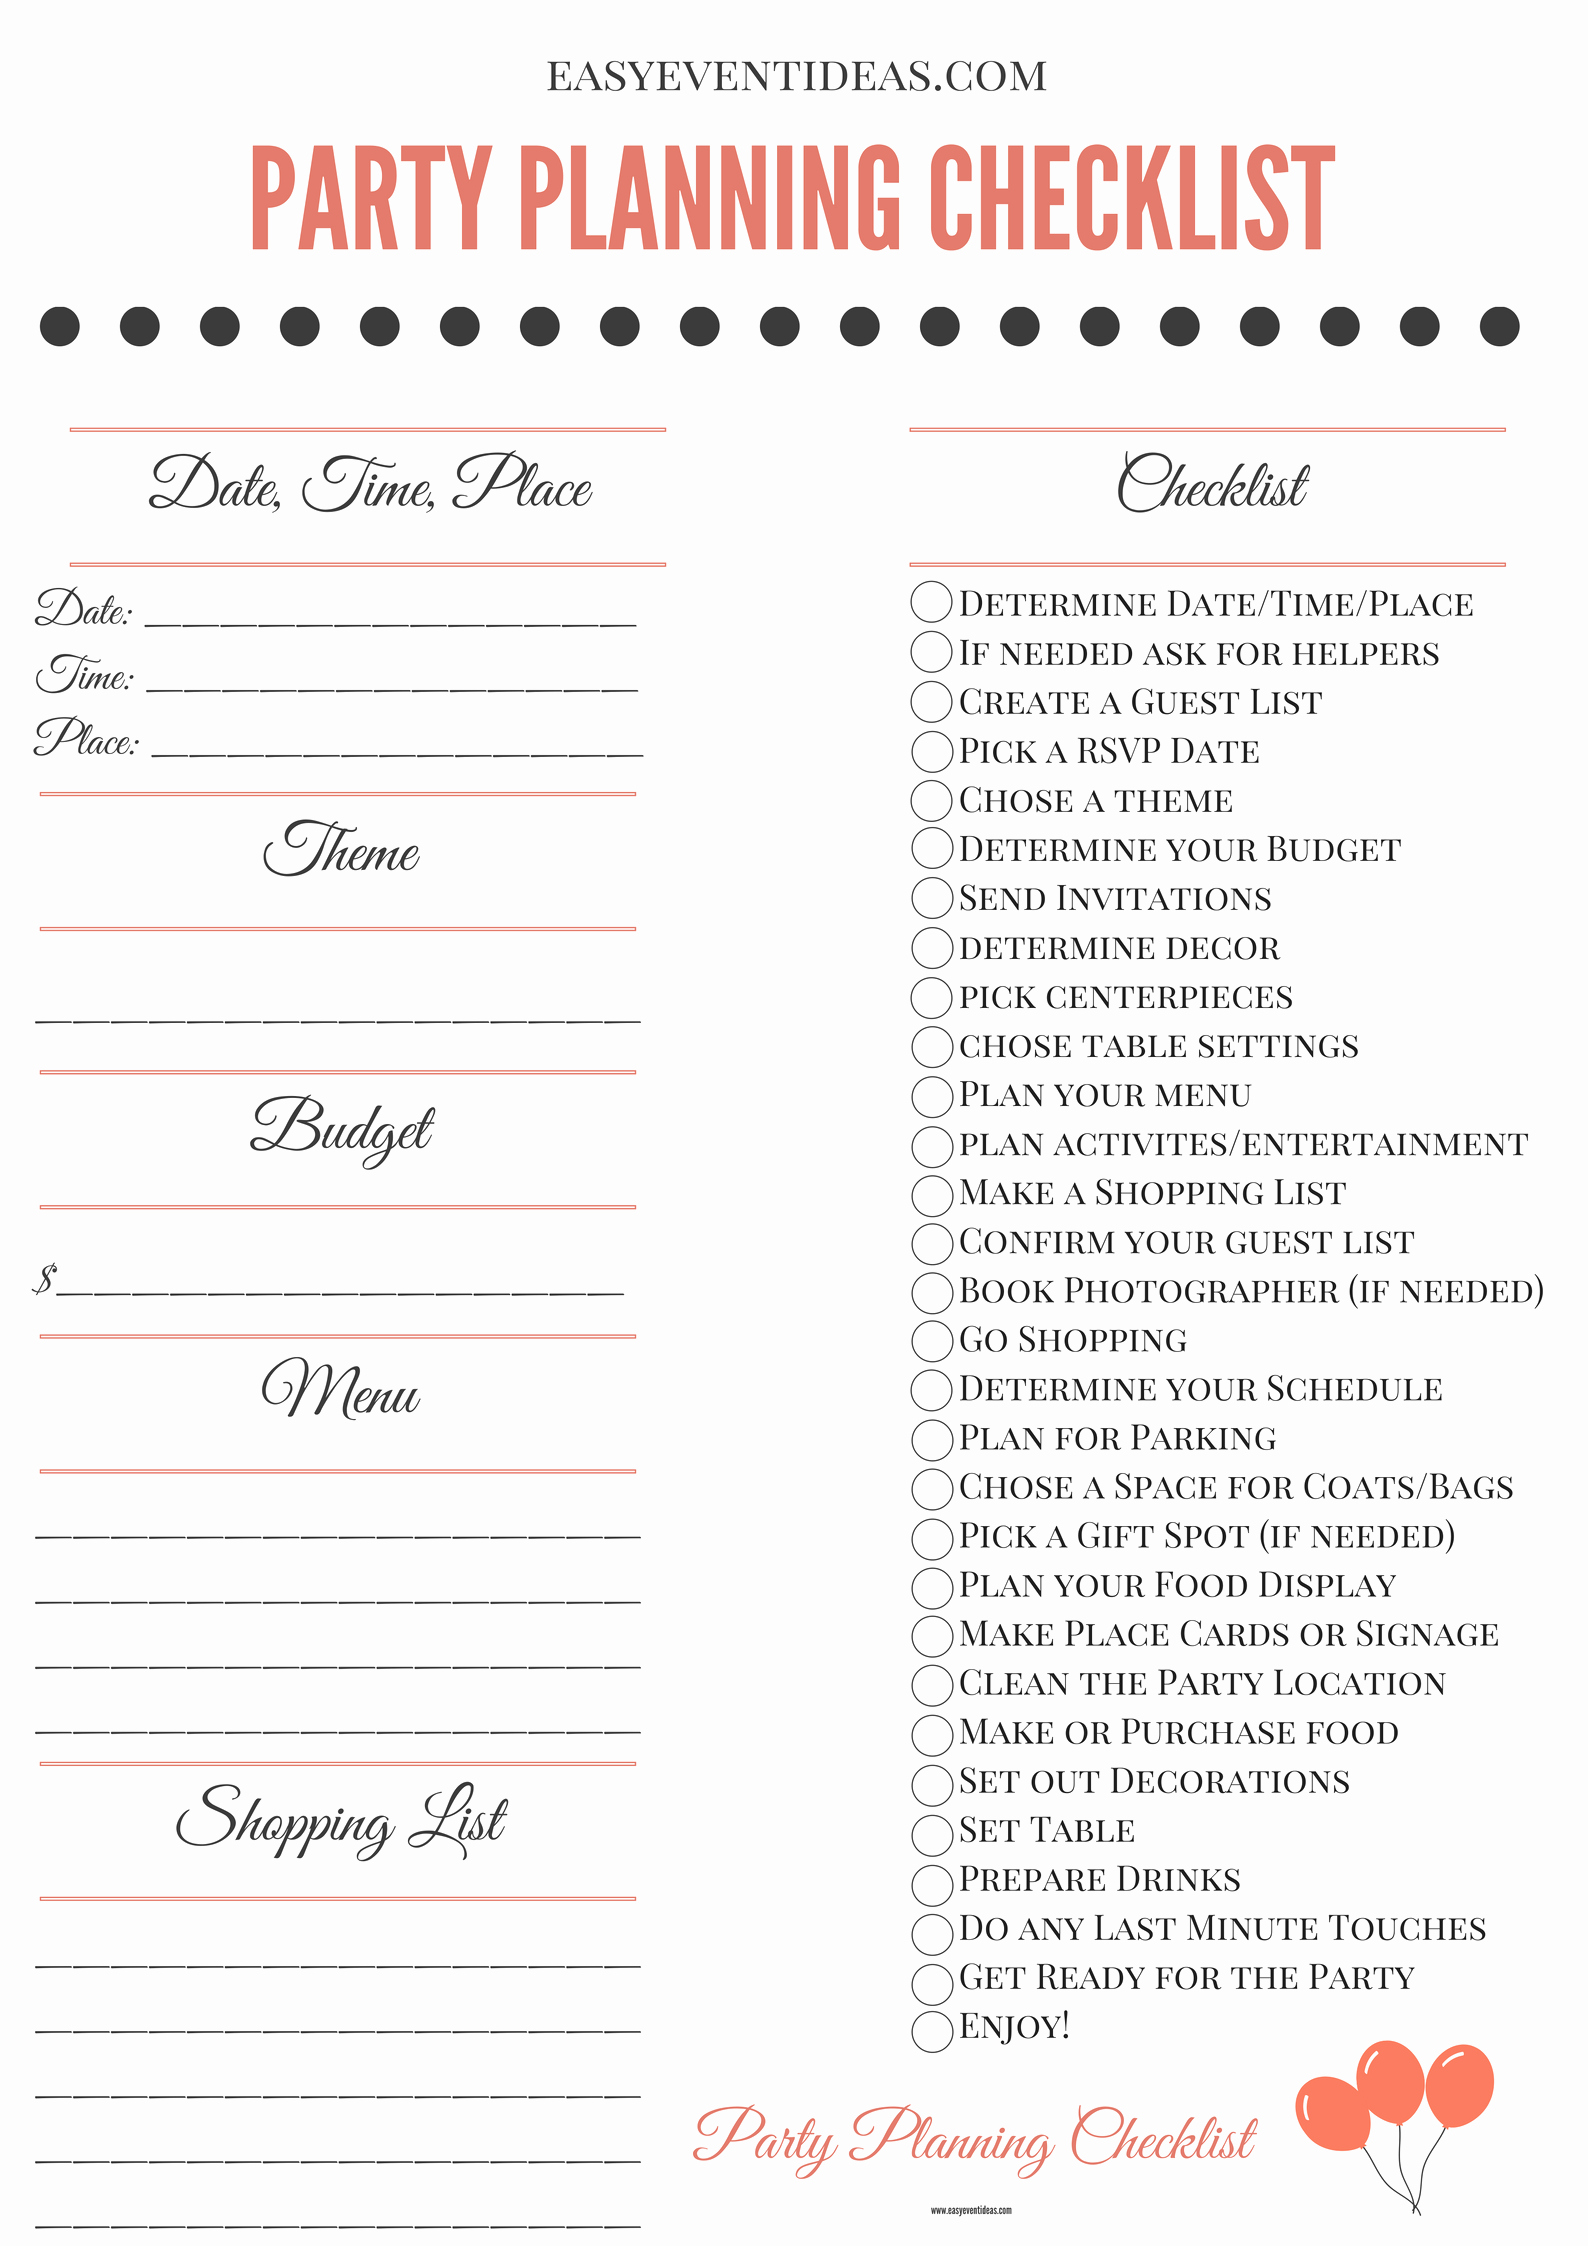 Baby Shower Planning List Fresh Printable Party Planning Checklist – Easy event Ideas